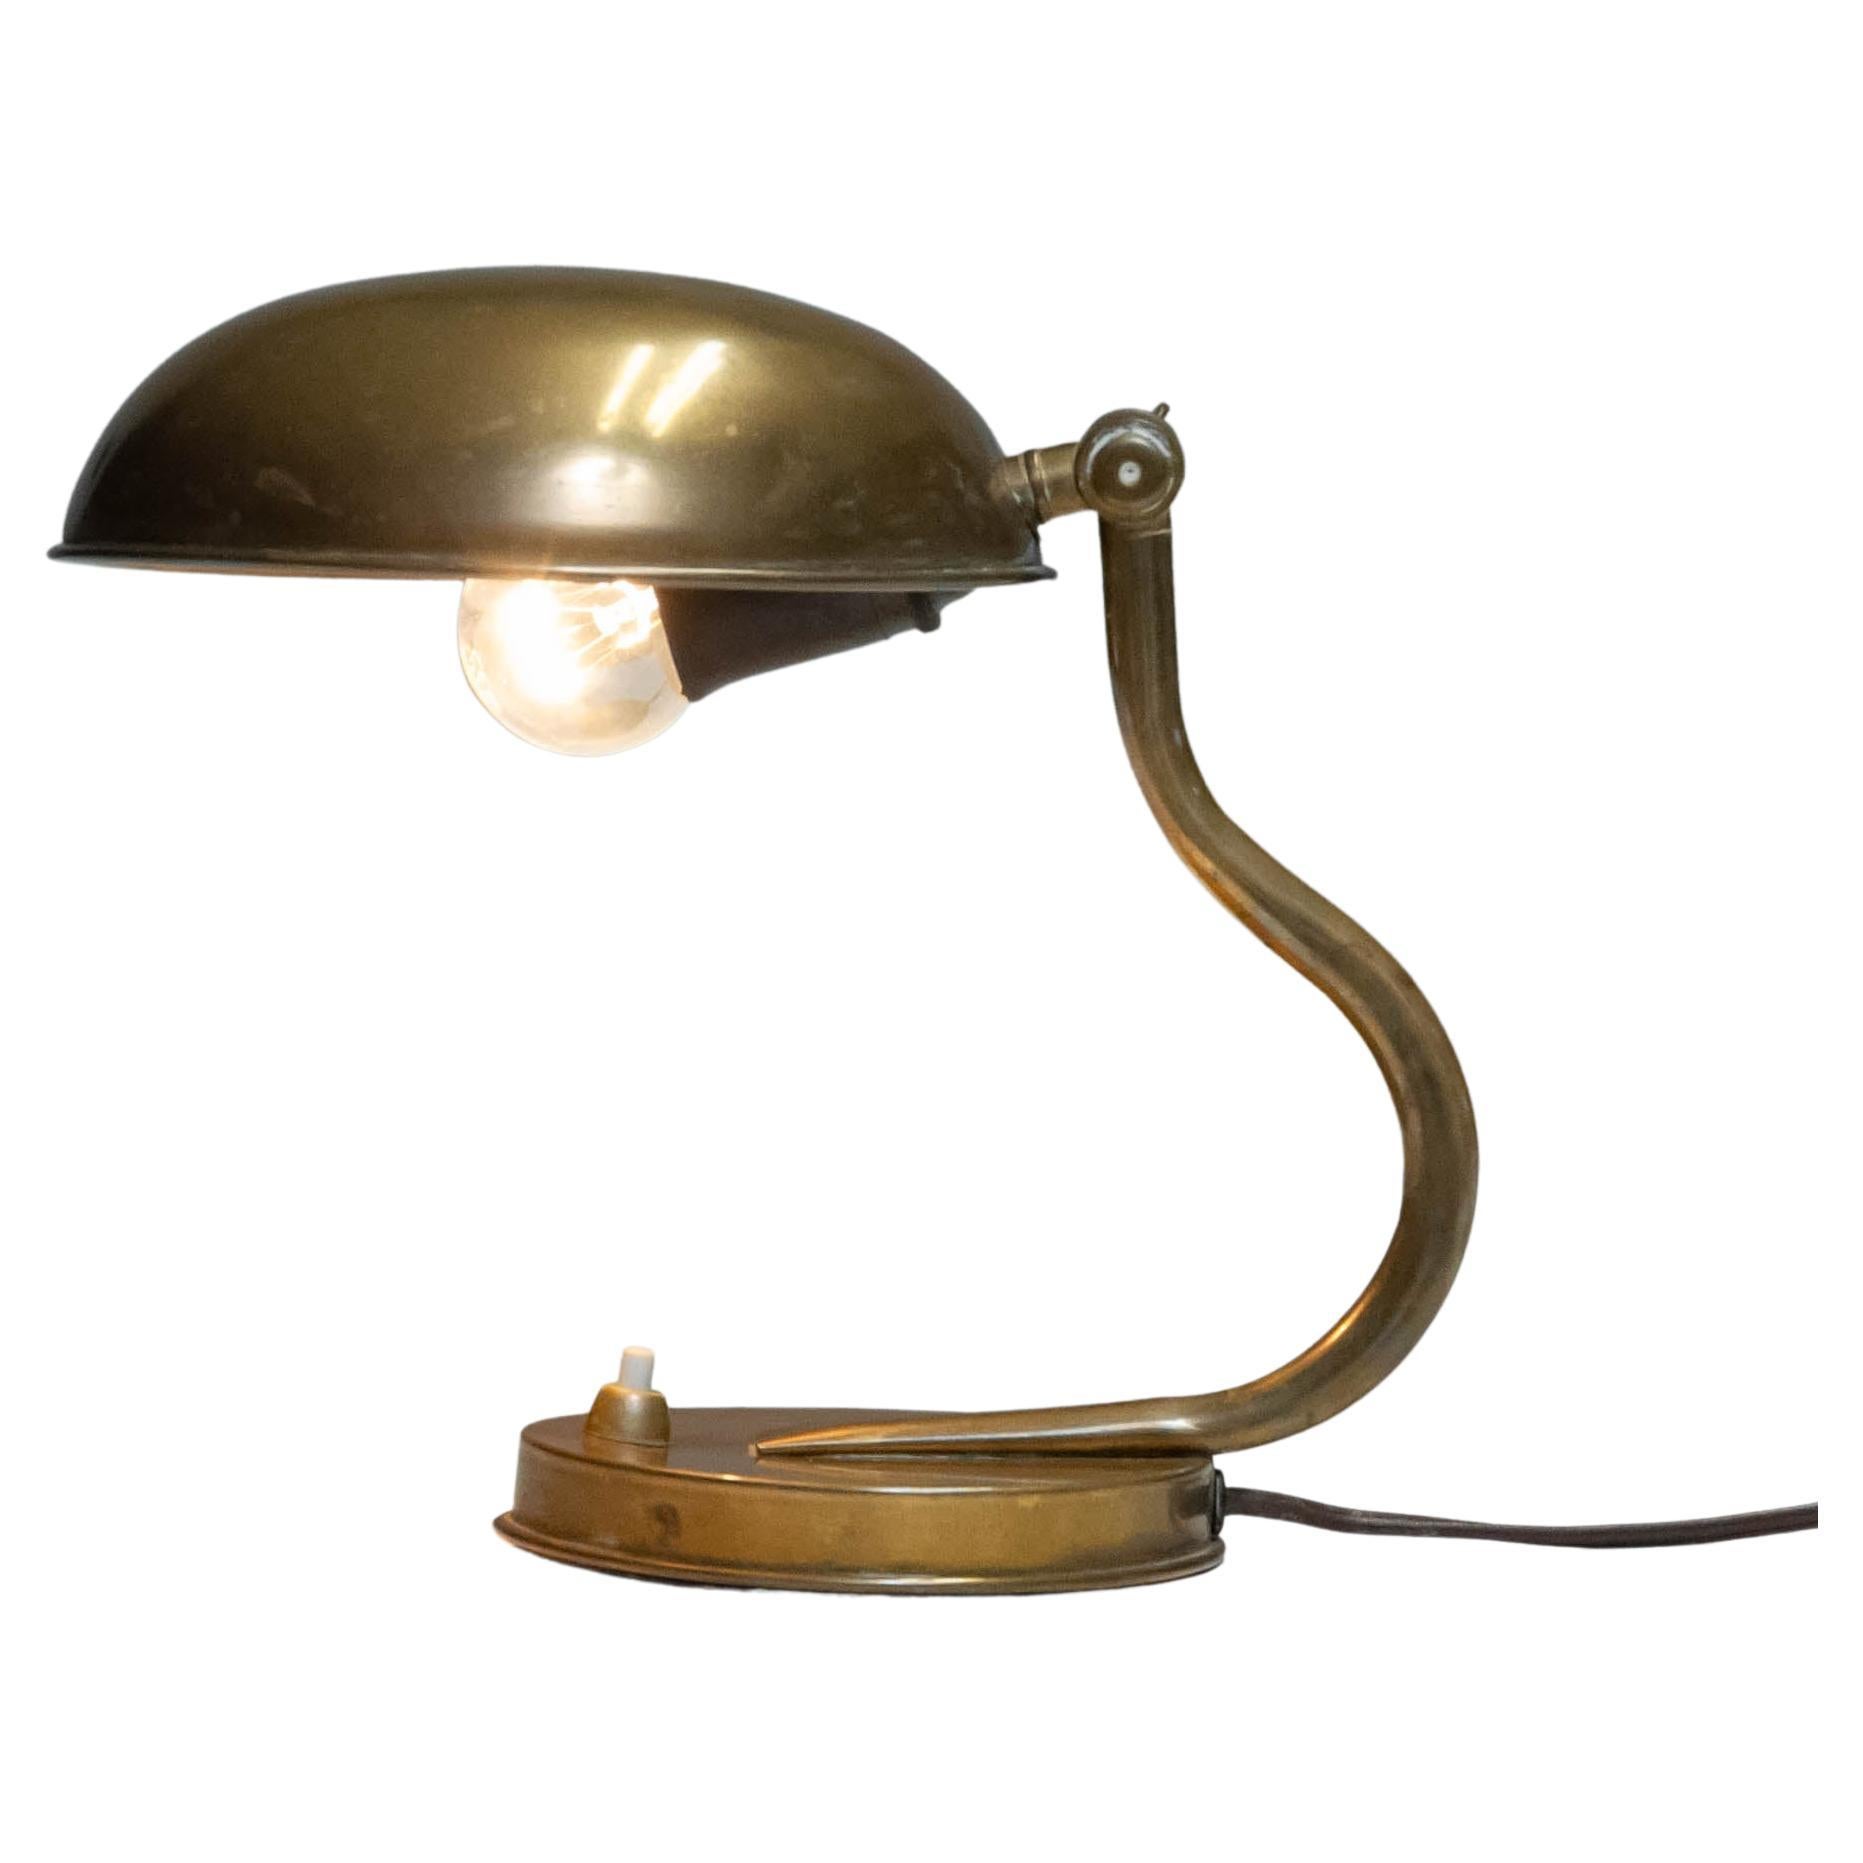 1930s 1940s Table / Desk Lamp with Adjustable Shade in Brass by ASEA